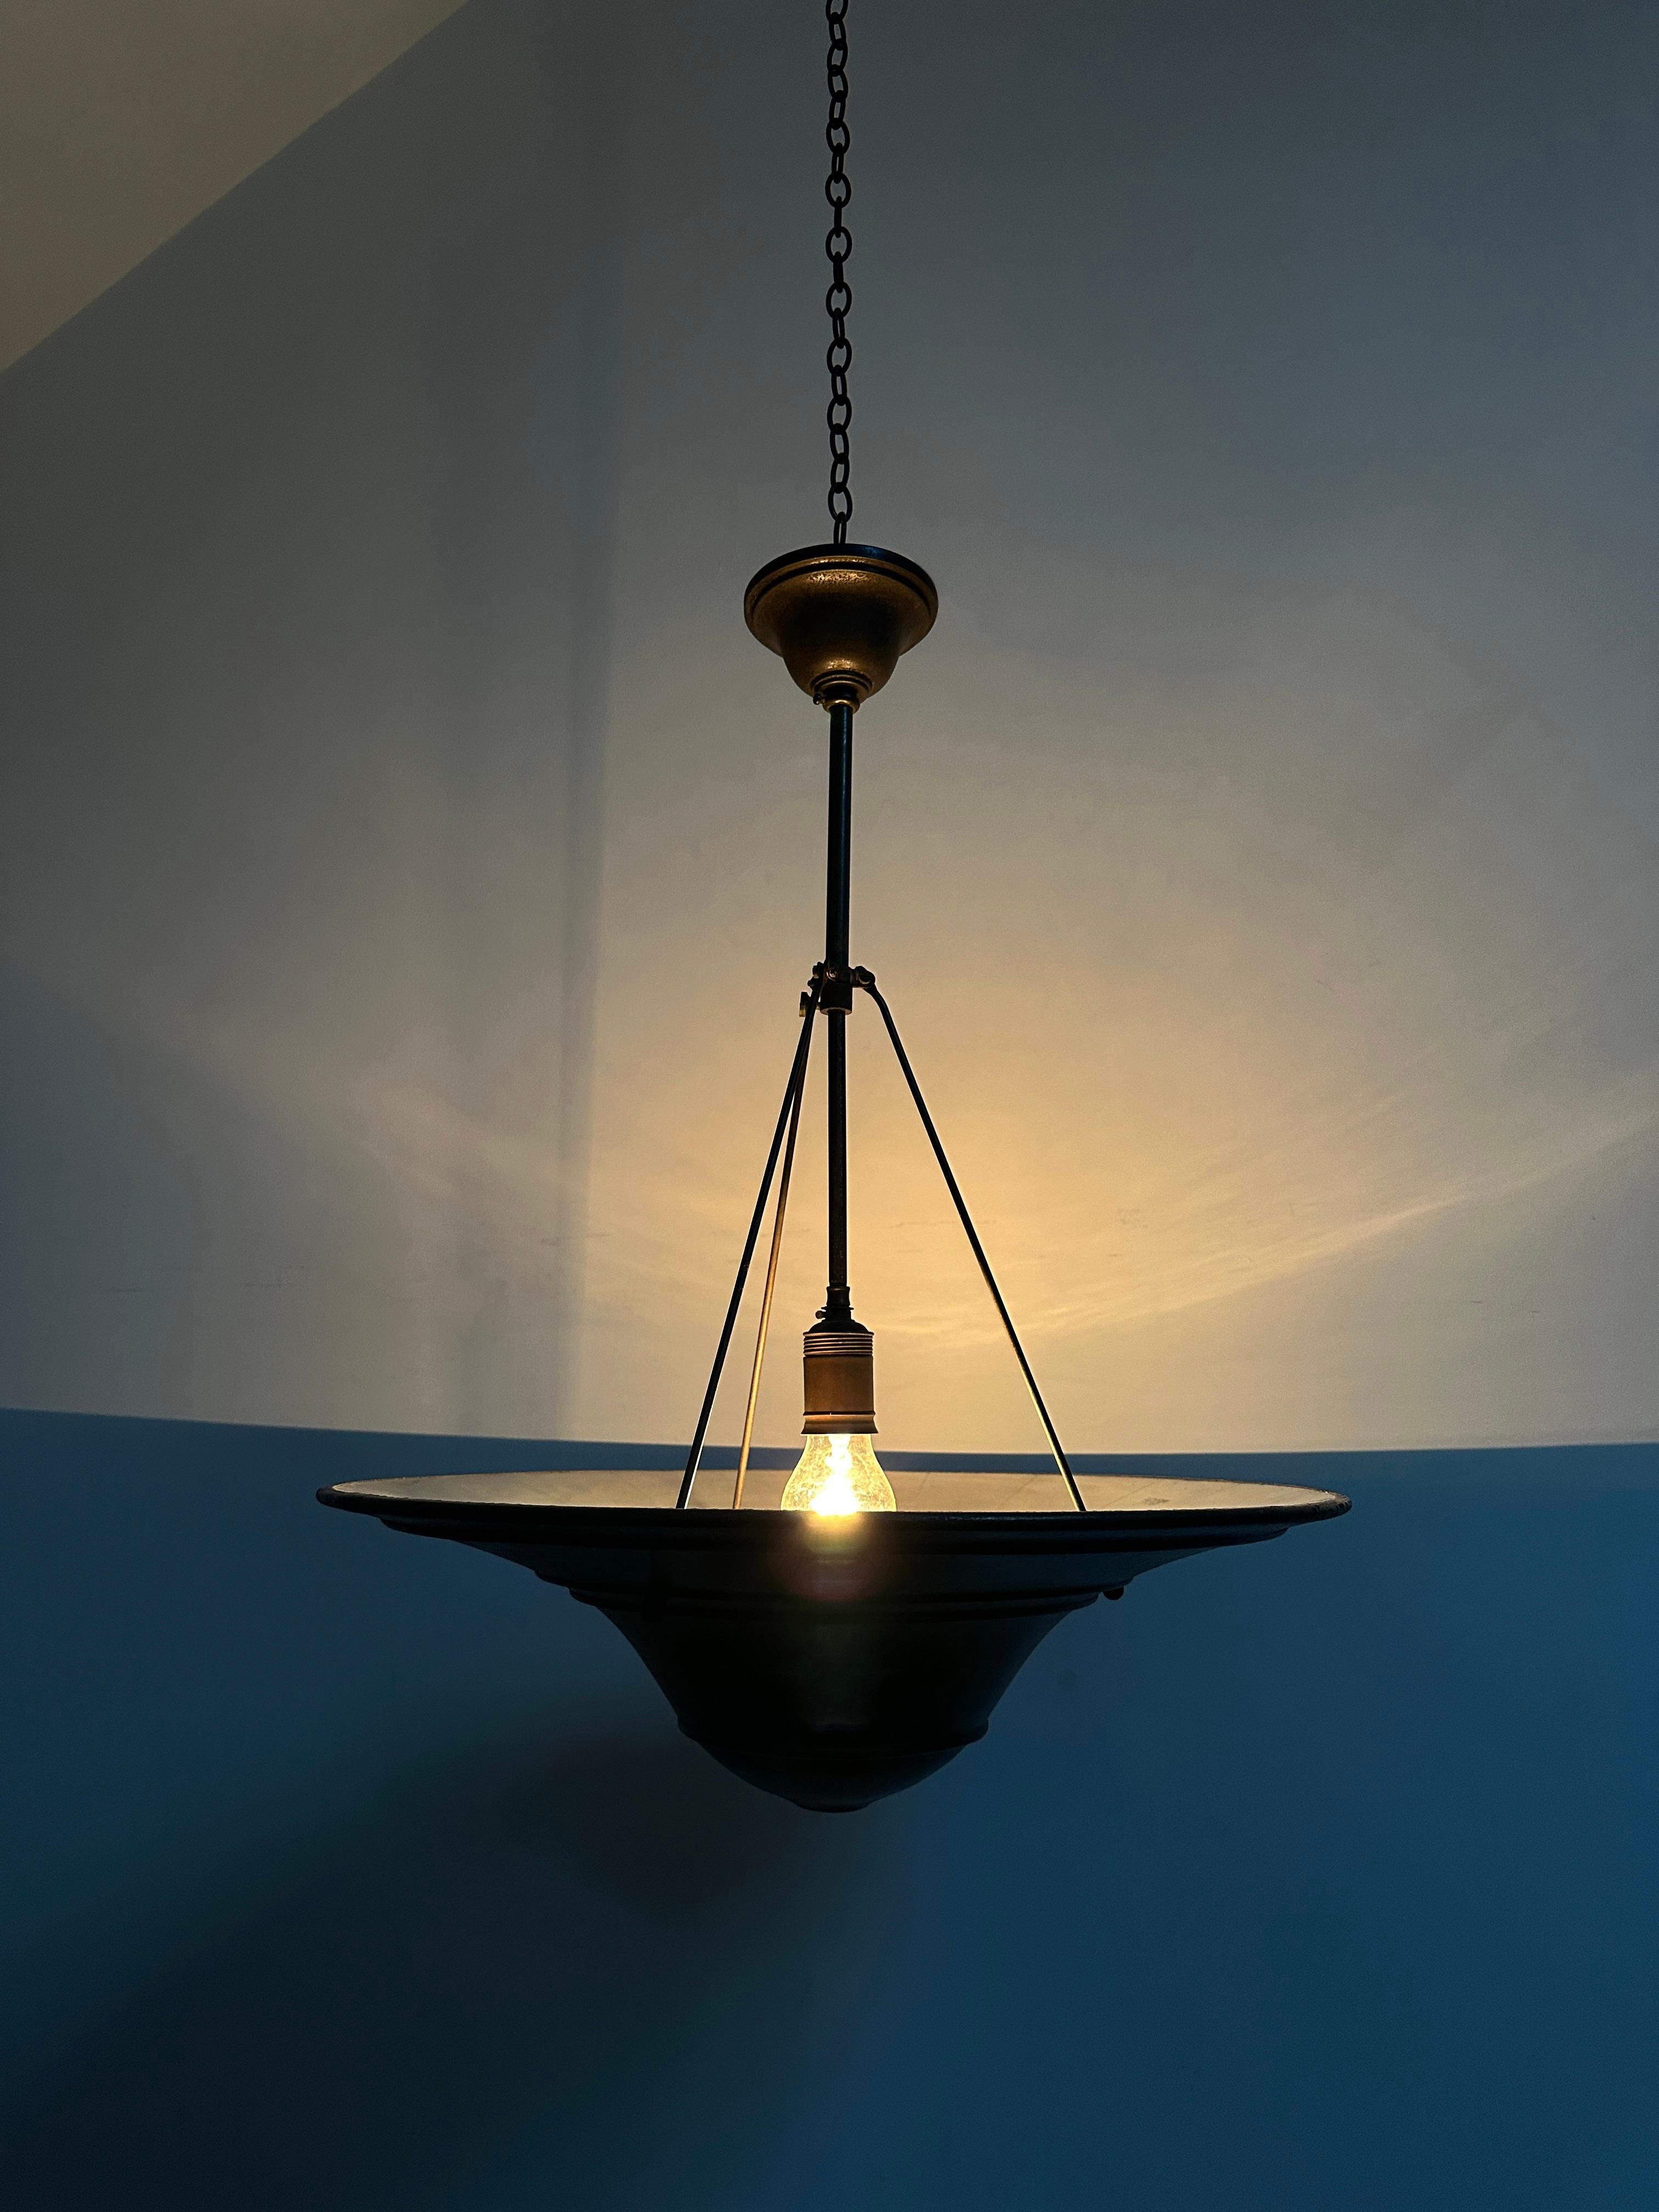 Antique Vintage Industrial Bauhaus Wiskott Mirrored Ceiling Pendant Light Lamp In Good Condition For Sale In Sale, GB